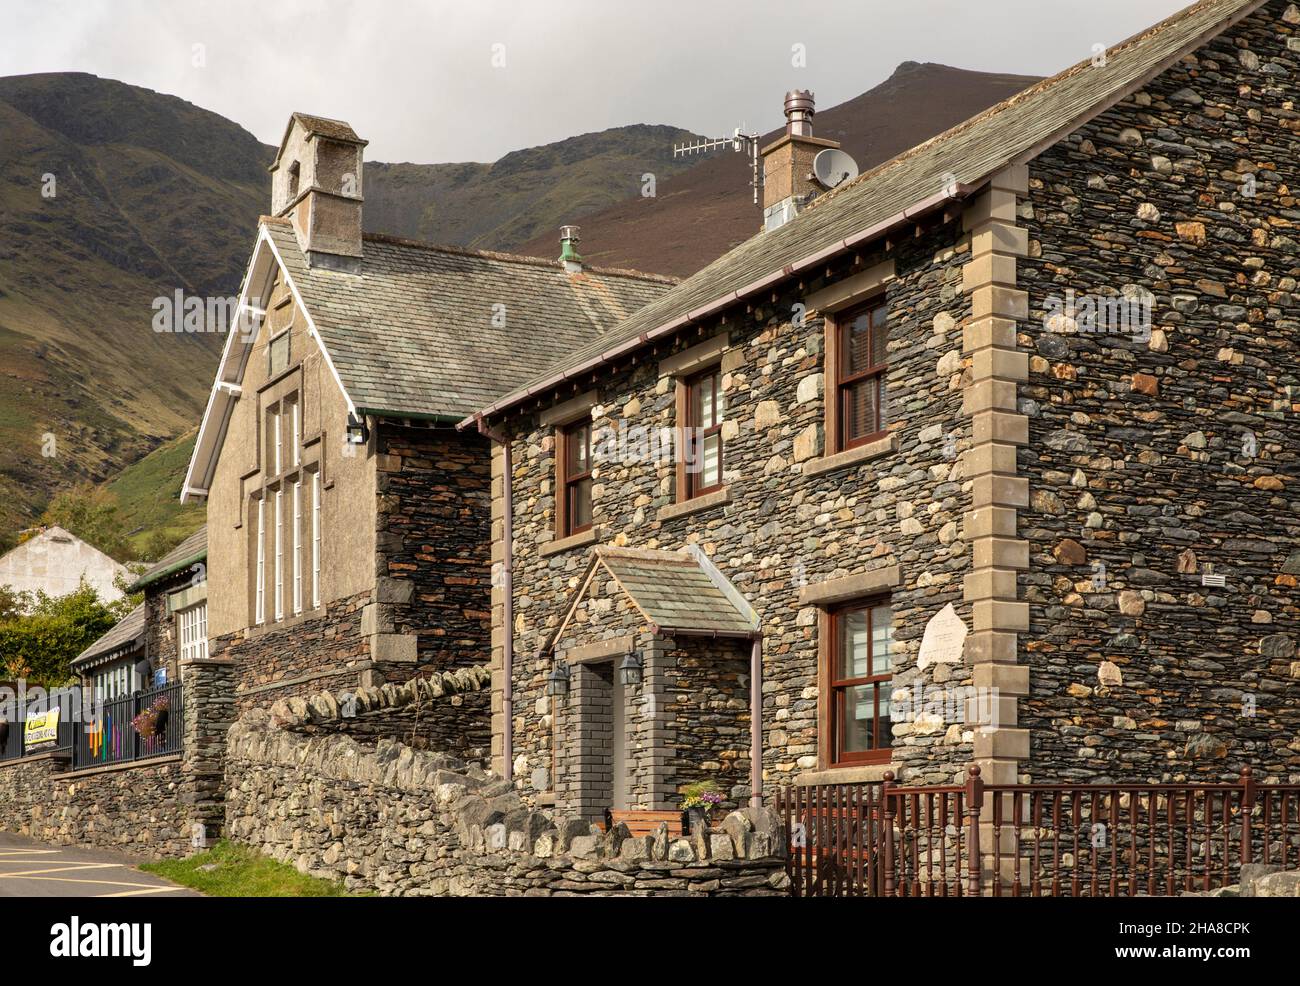 UK, Cumbria, Allerdale, Keswick, Threlkeld, Blease Road, stone-built house next to Primary School Stock Photo